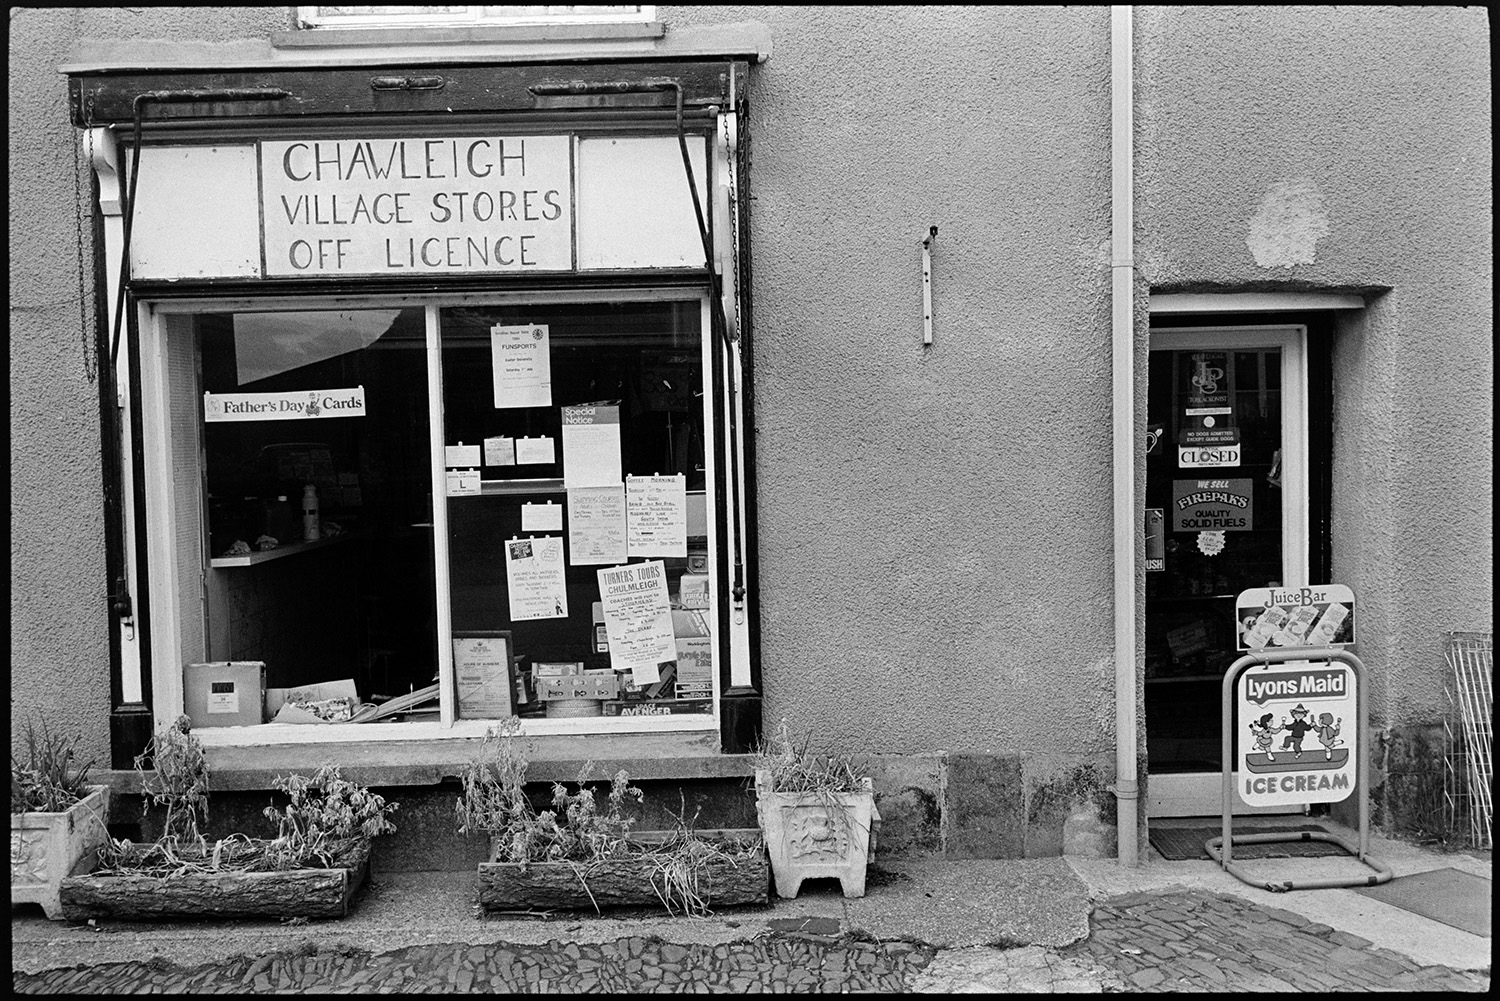 Front of village store and off licence.
[The shop front window of Chawleigh Village Stores and Off Licence. Flower boxes are outside and signs and notices are stuck in the window. The shop is closed.]